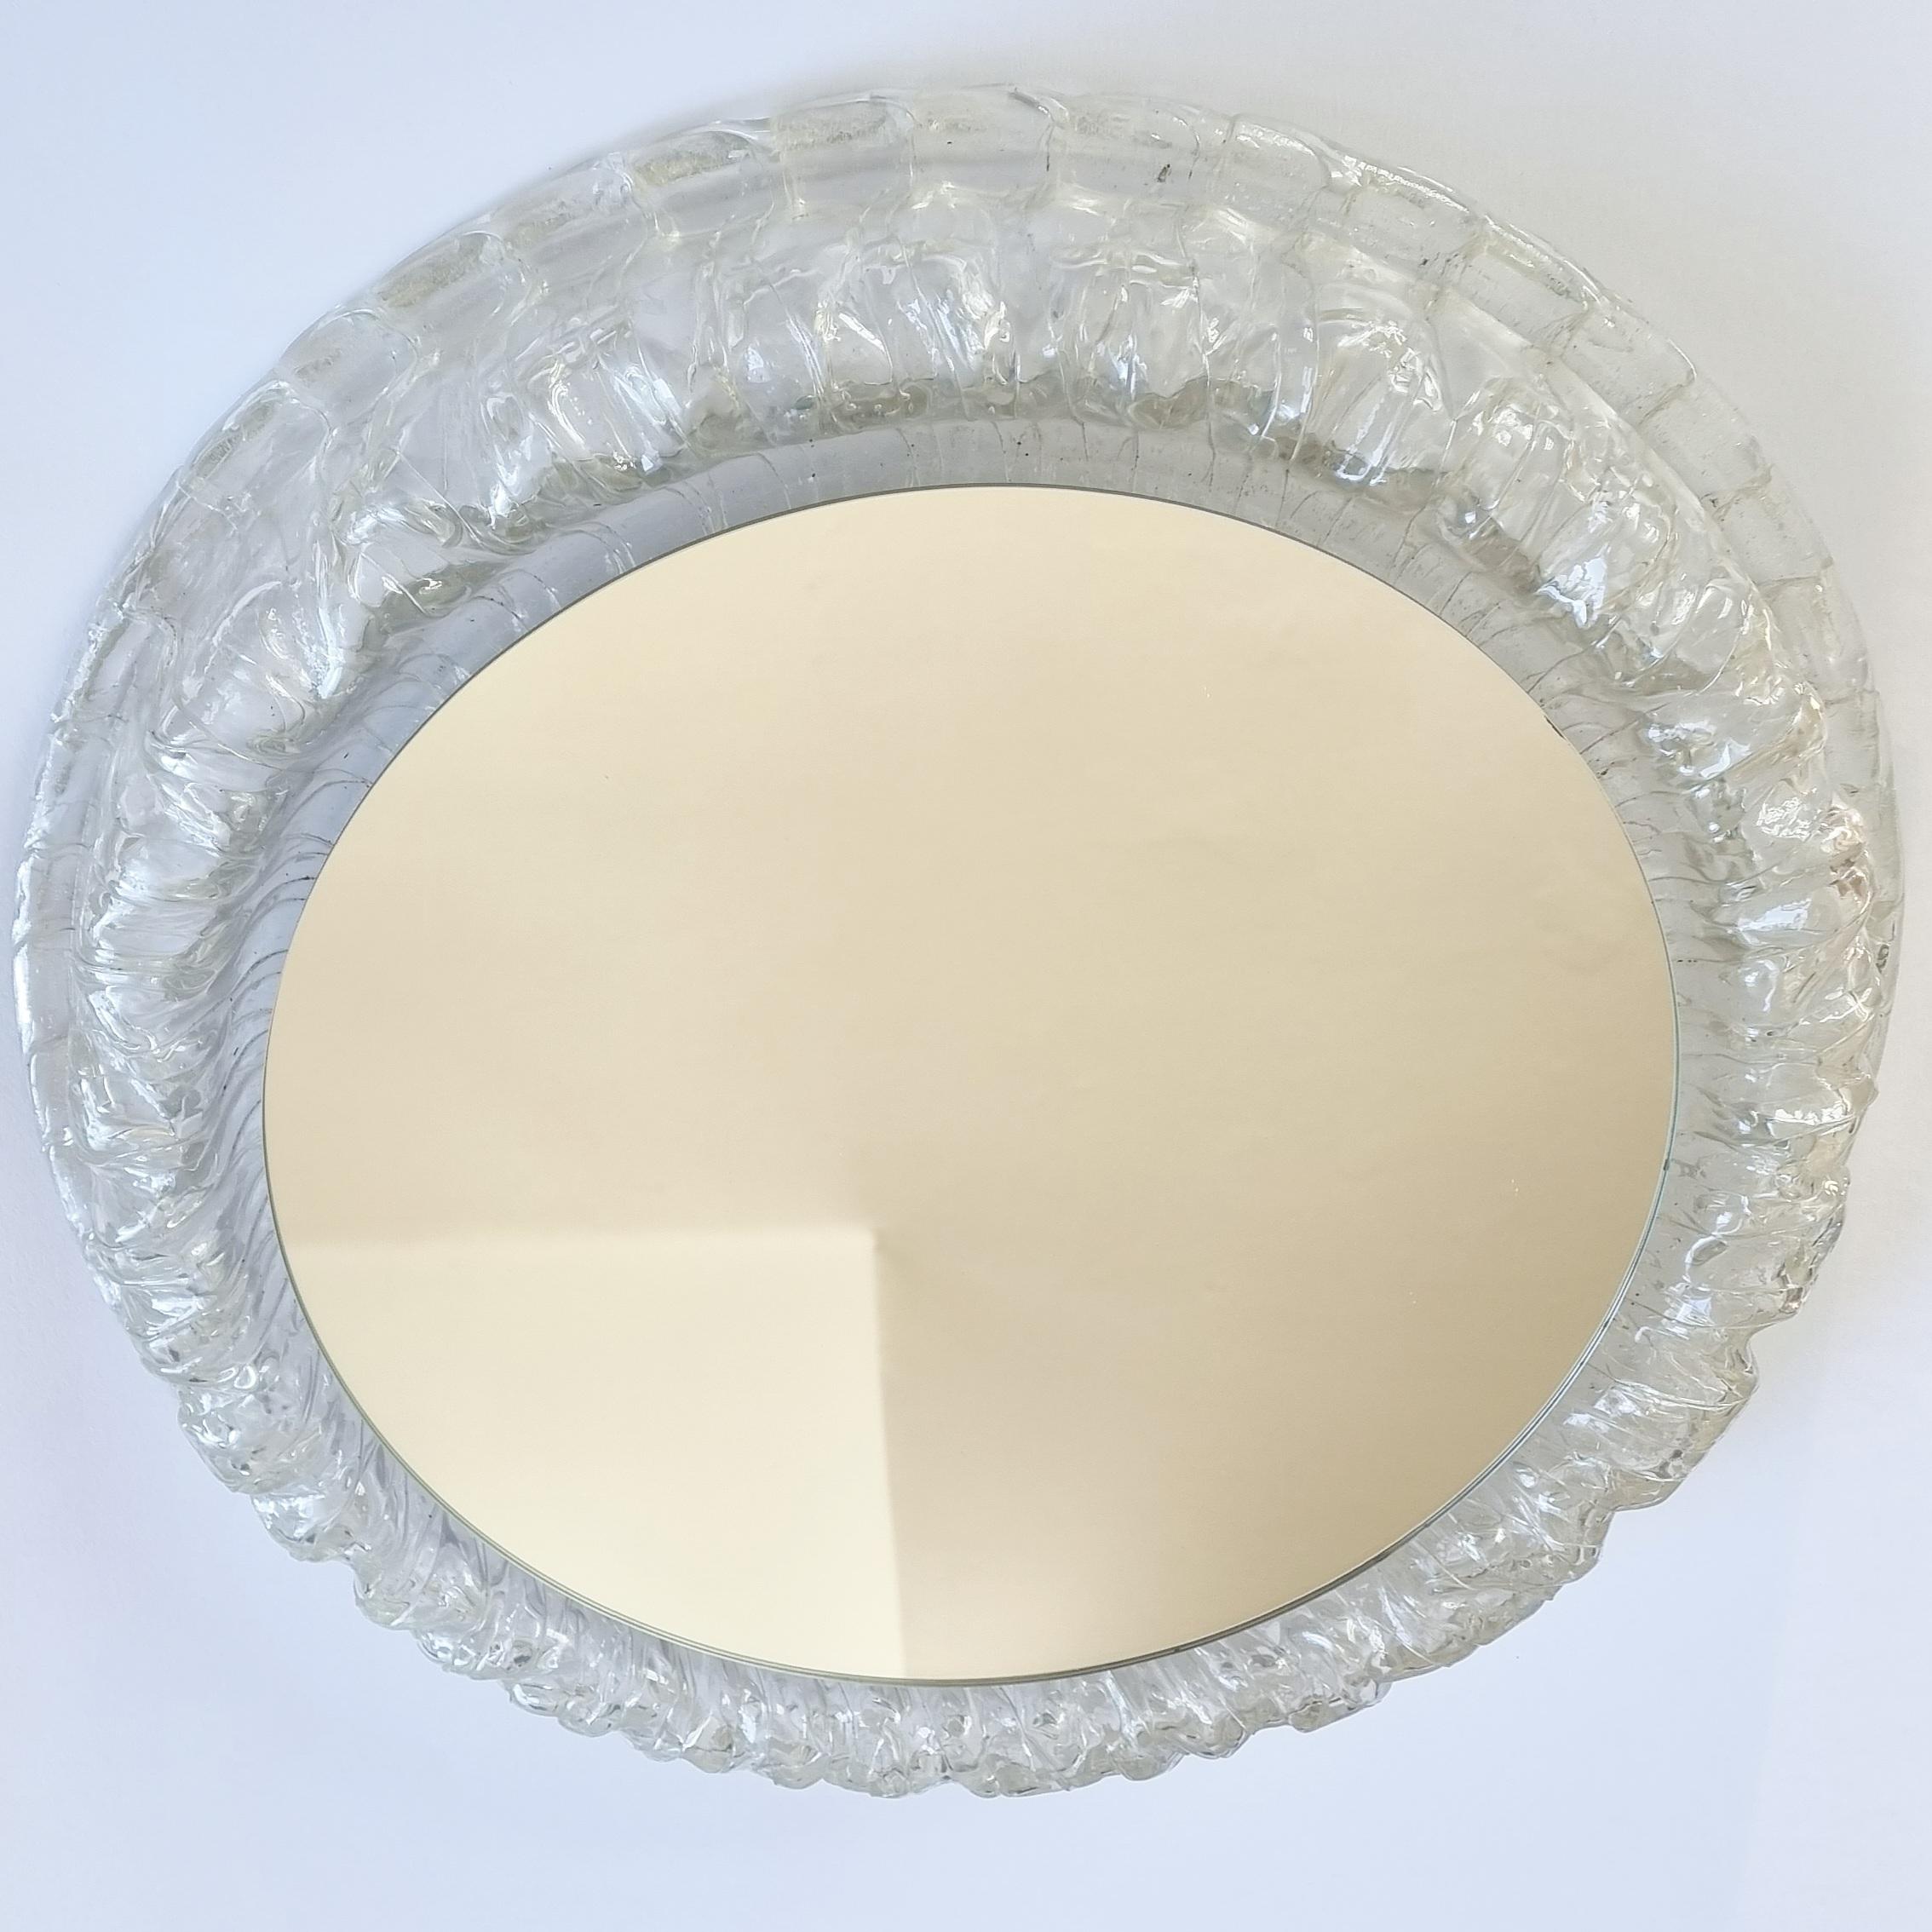 Midcentury Rare Wall Mirror Hillebrand, Germany, 1970s For Sale 1